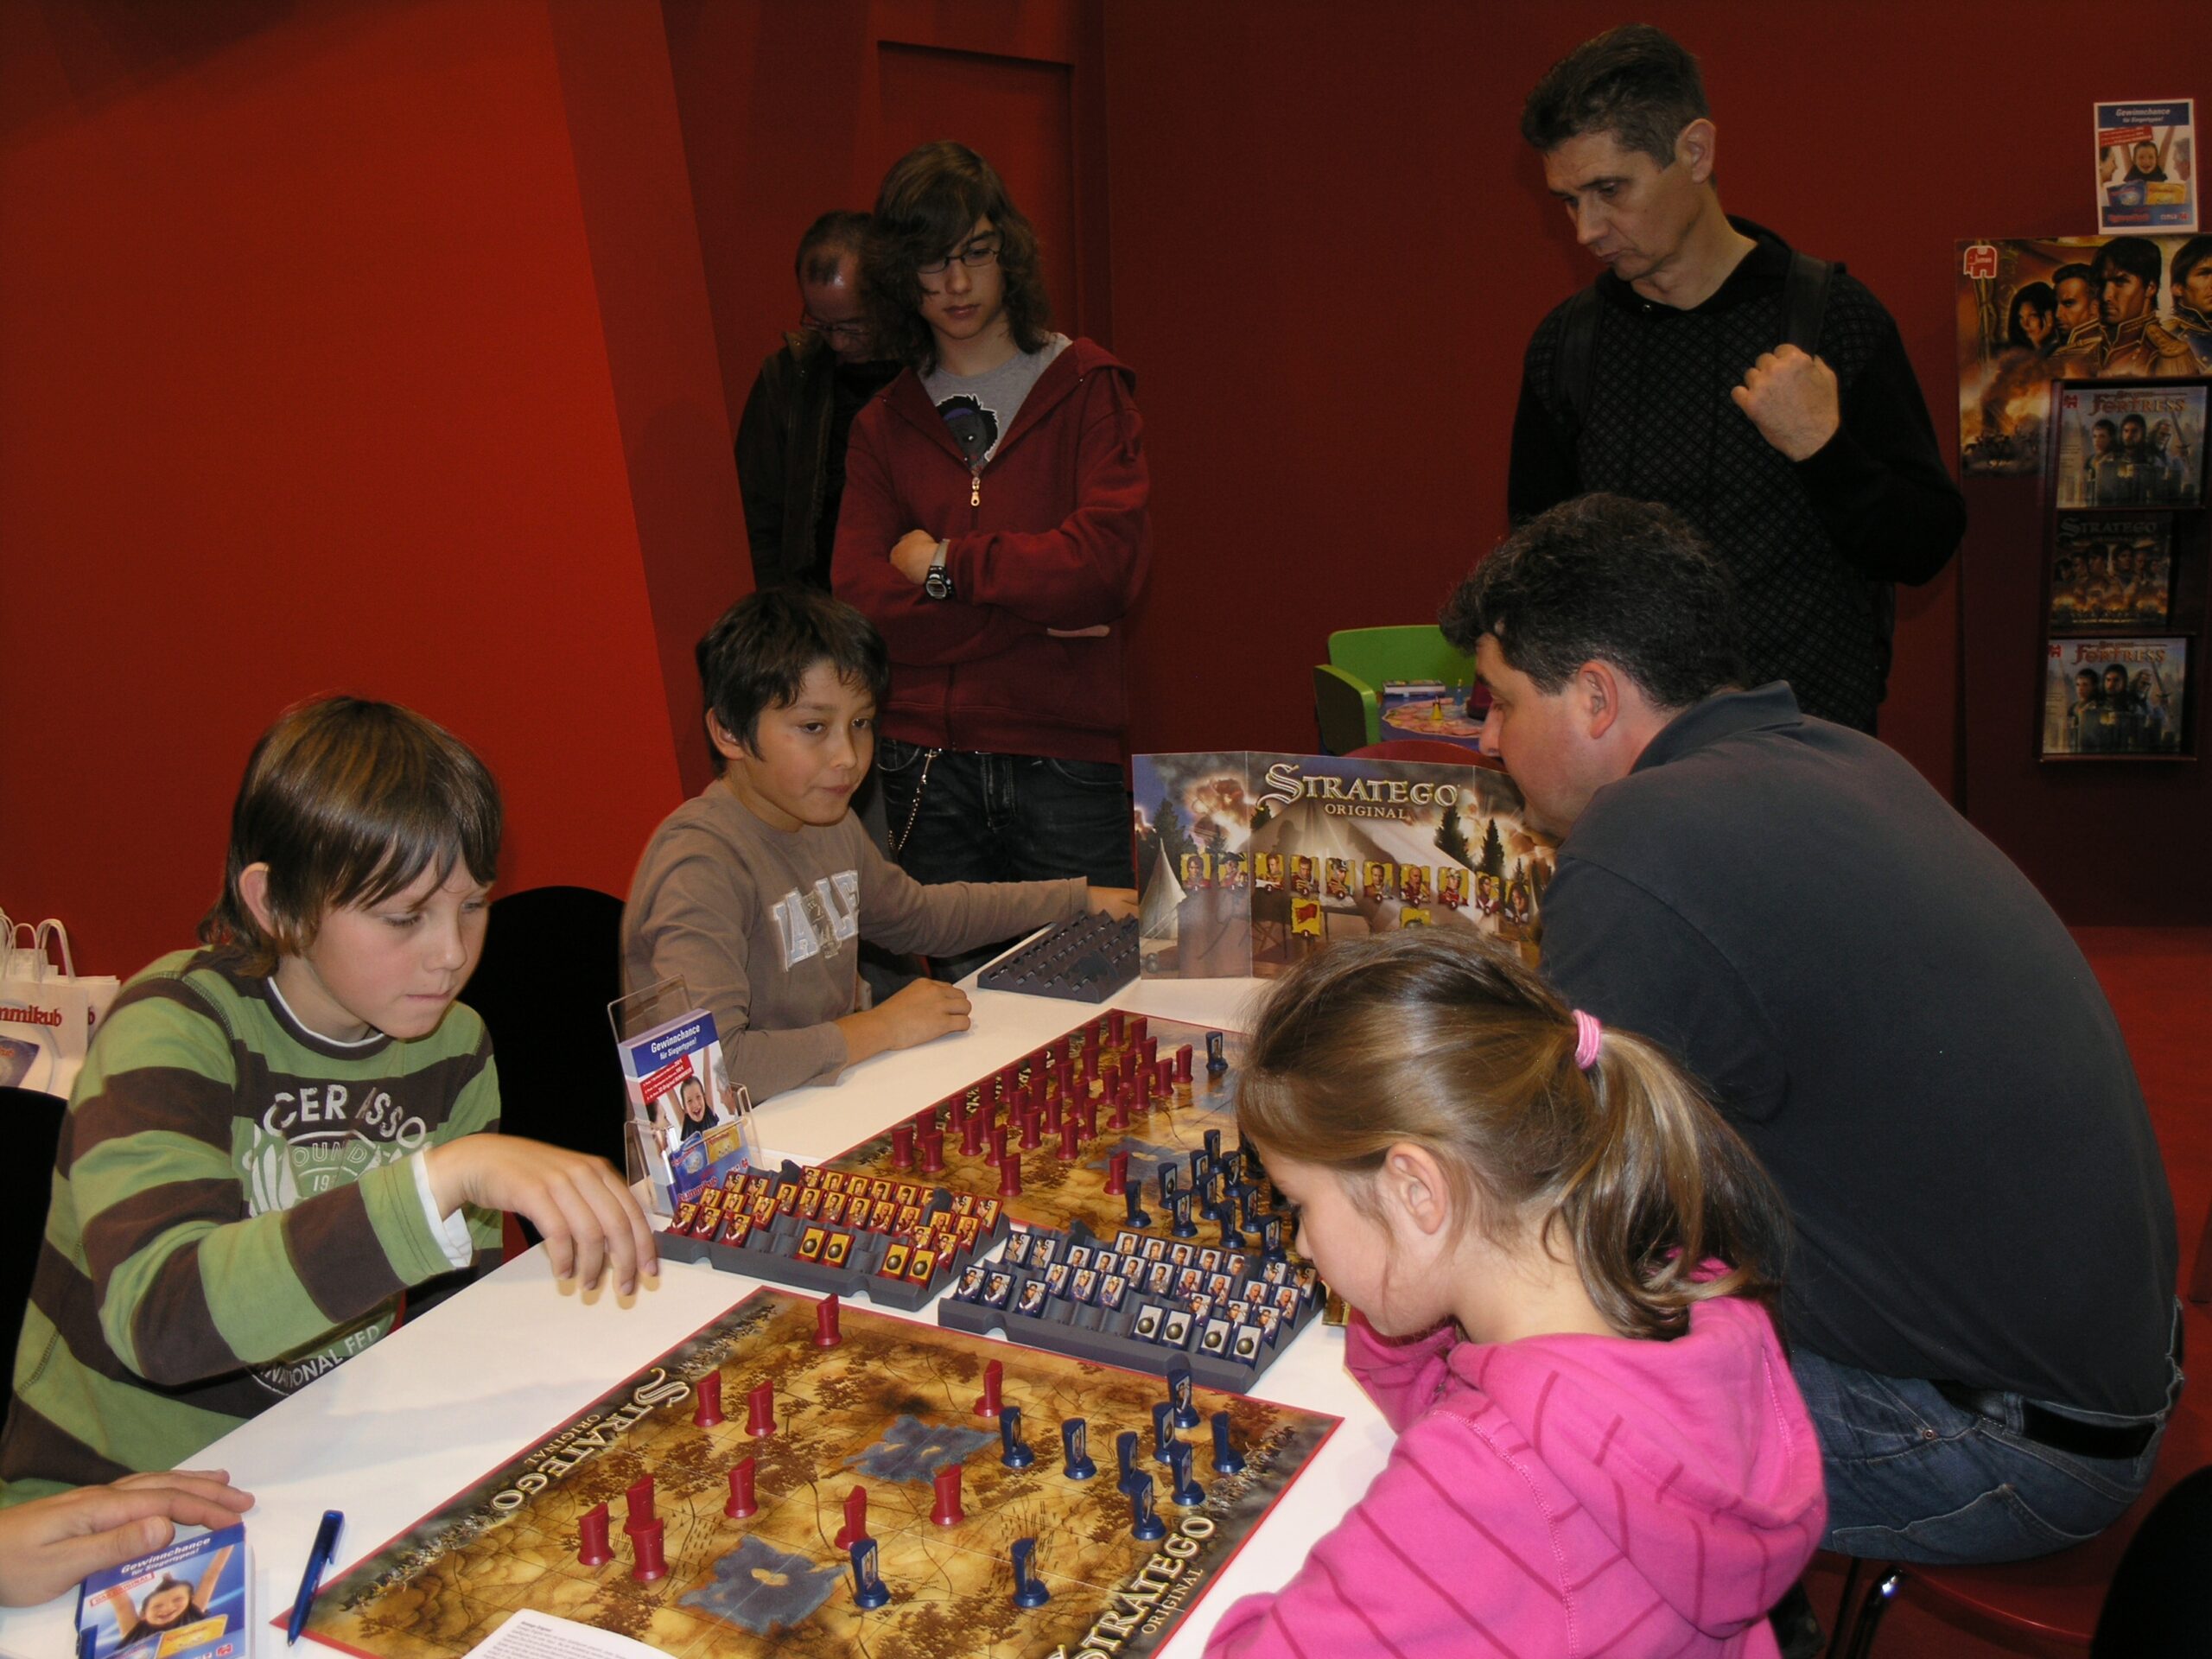 Two games of Stratego in session